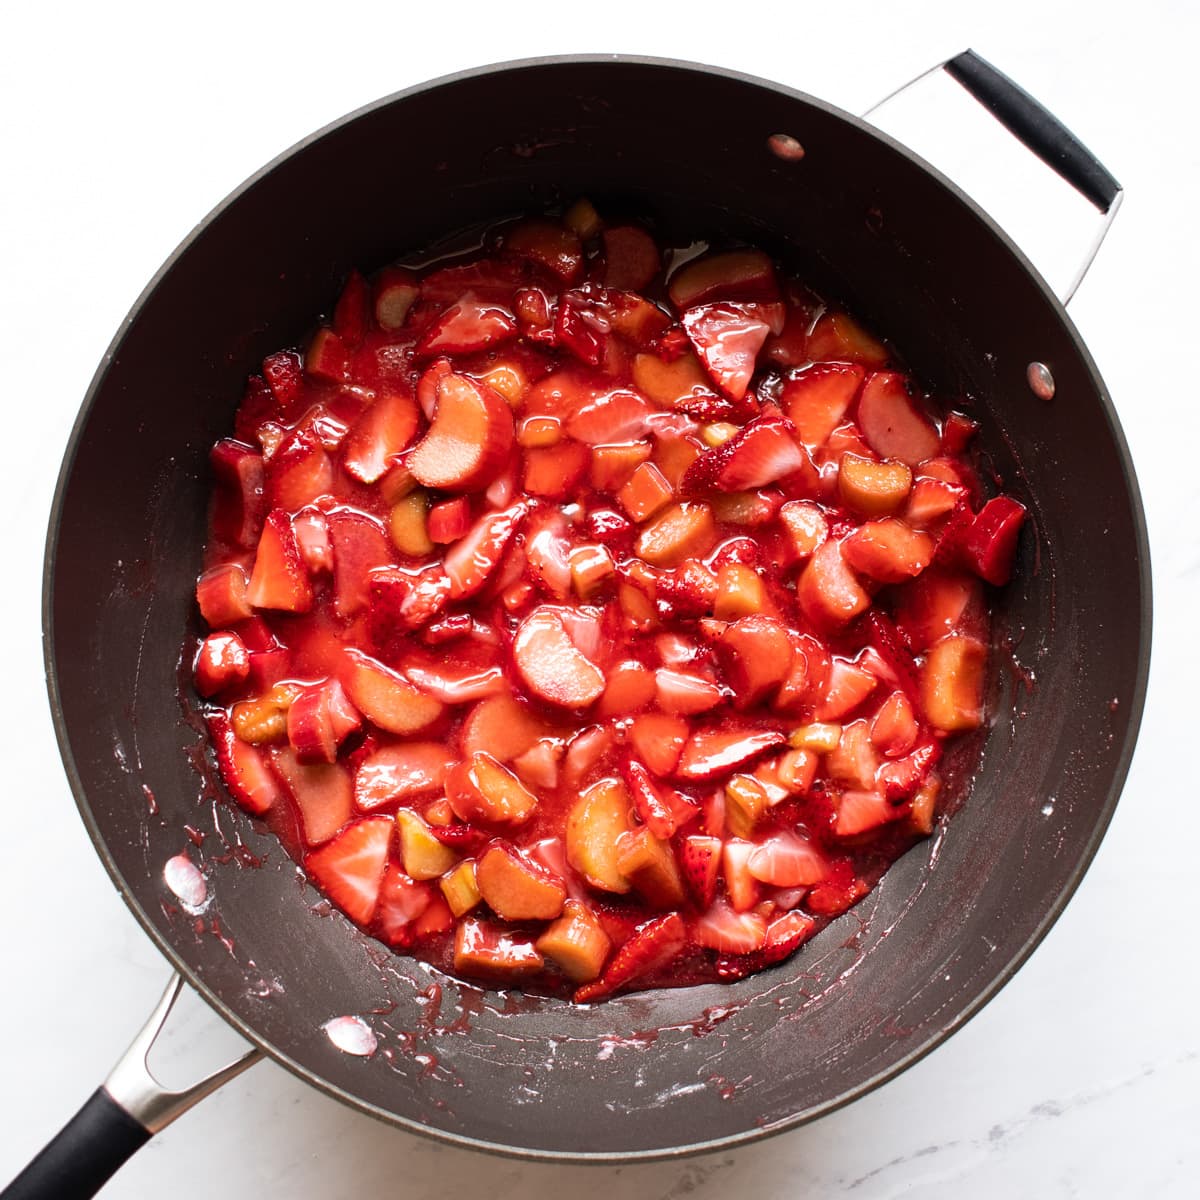 Strawberries, rhubarb, sugar, and cornstarch have been heated in a saucepan until syrupy. 